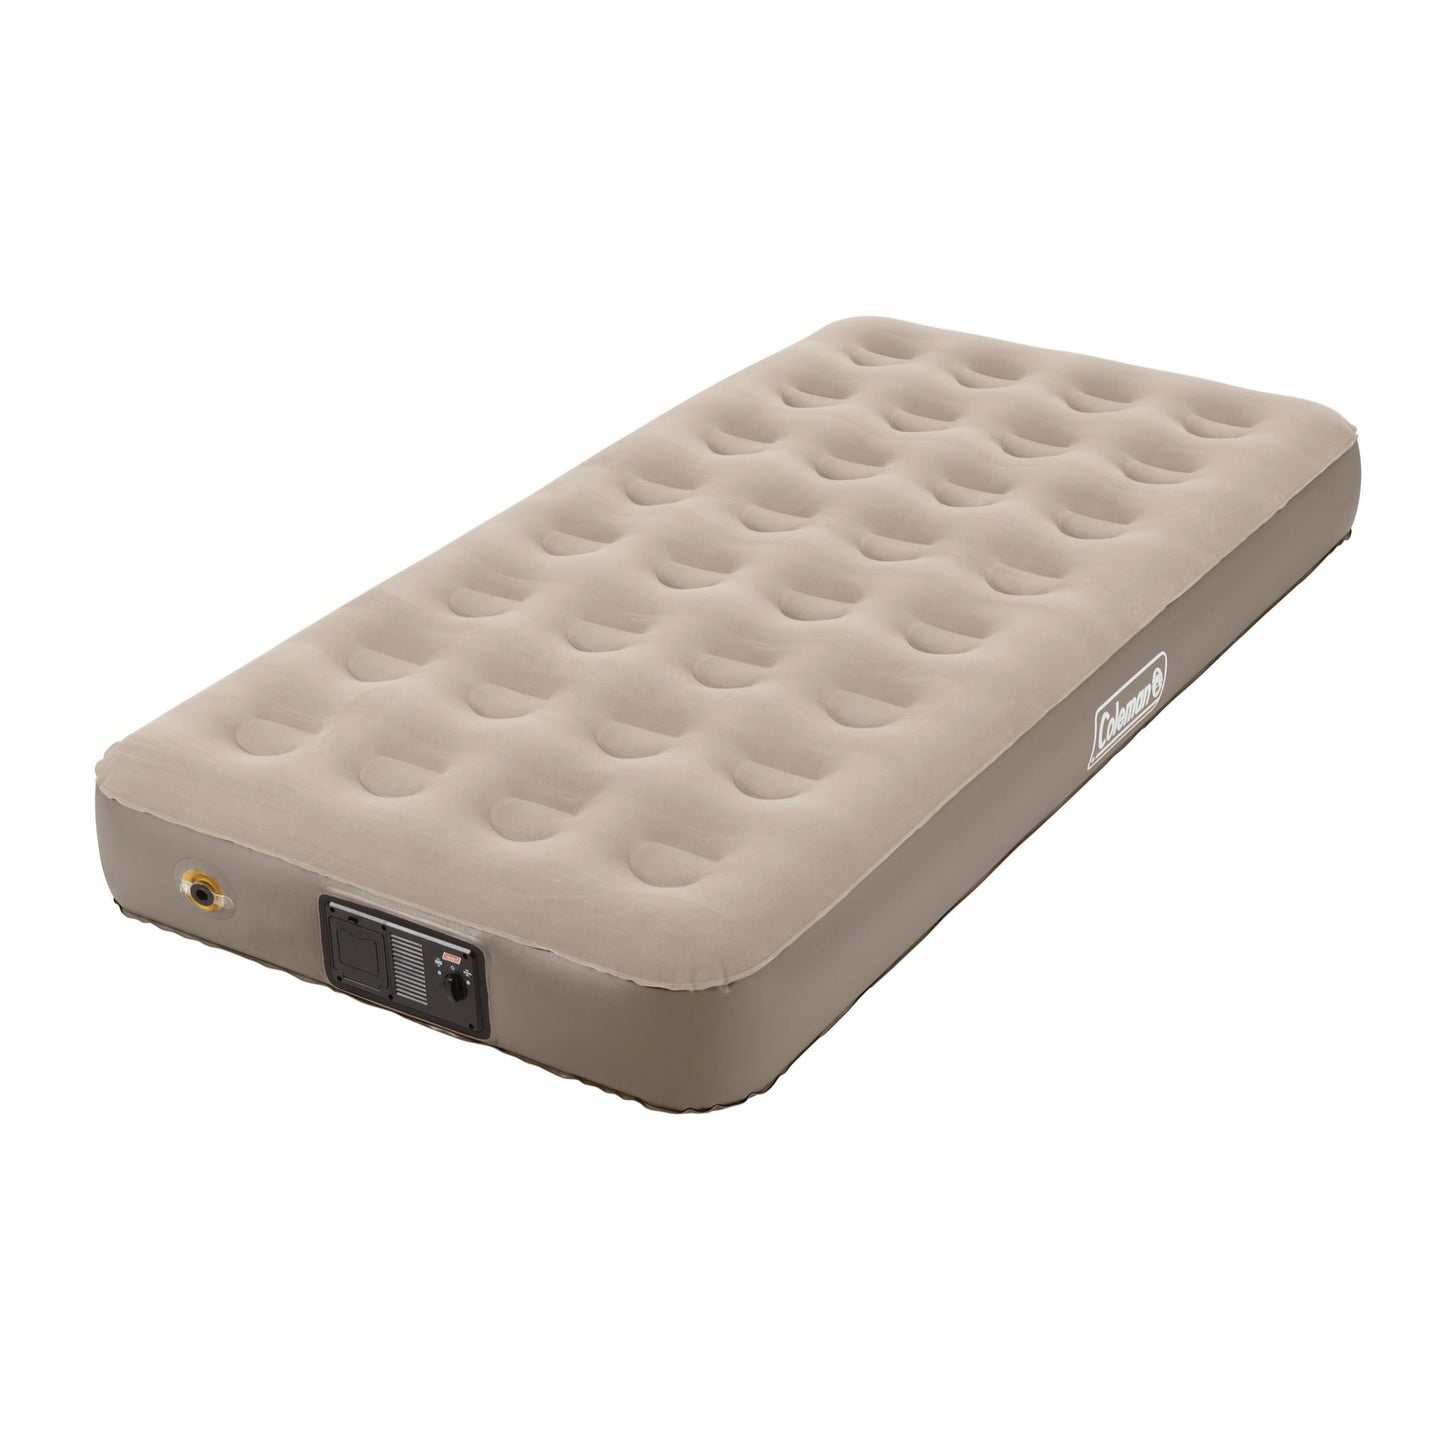 QuickBed Elite Extra High Airbed with Built-In Pump Twin